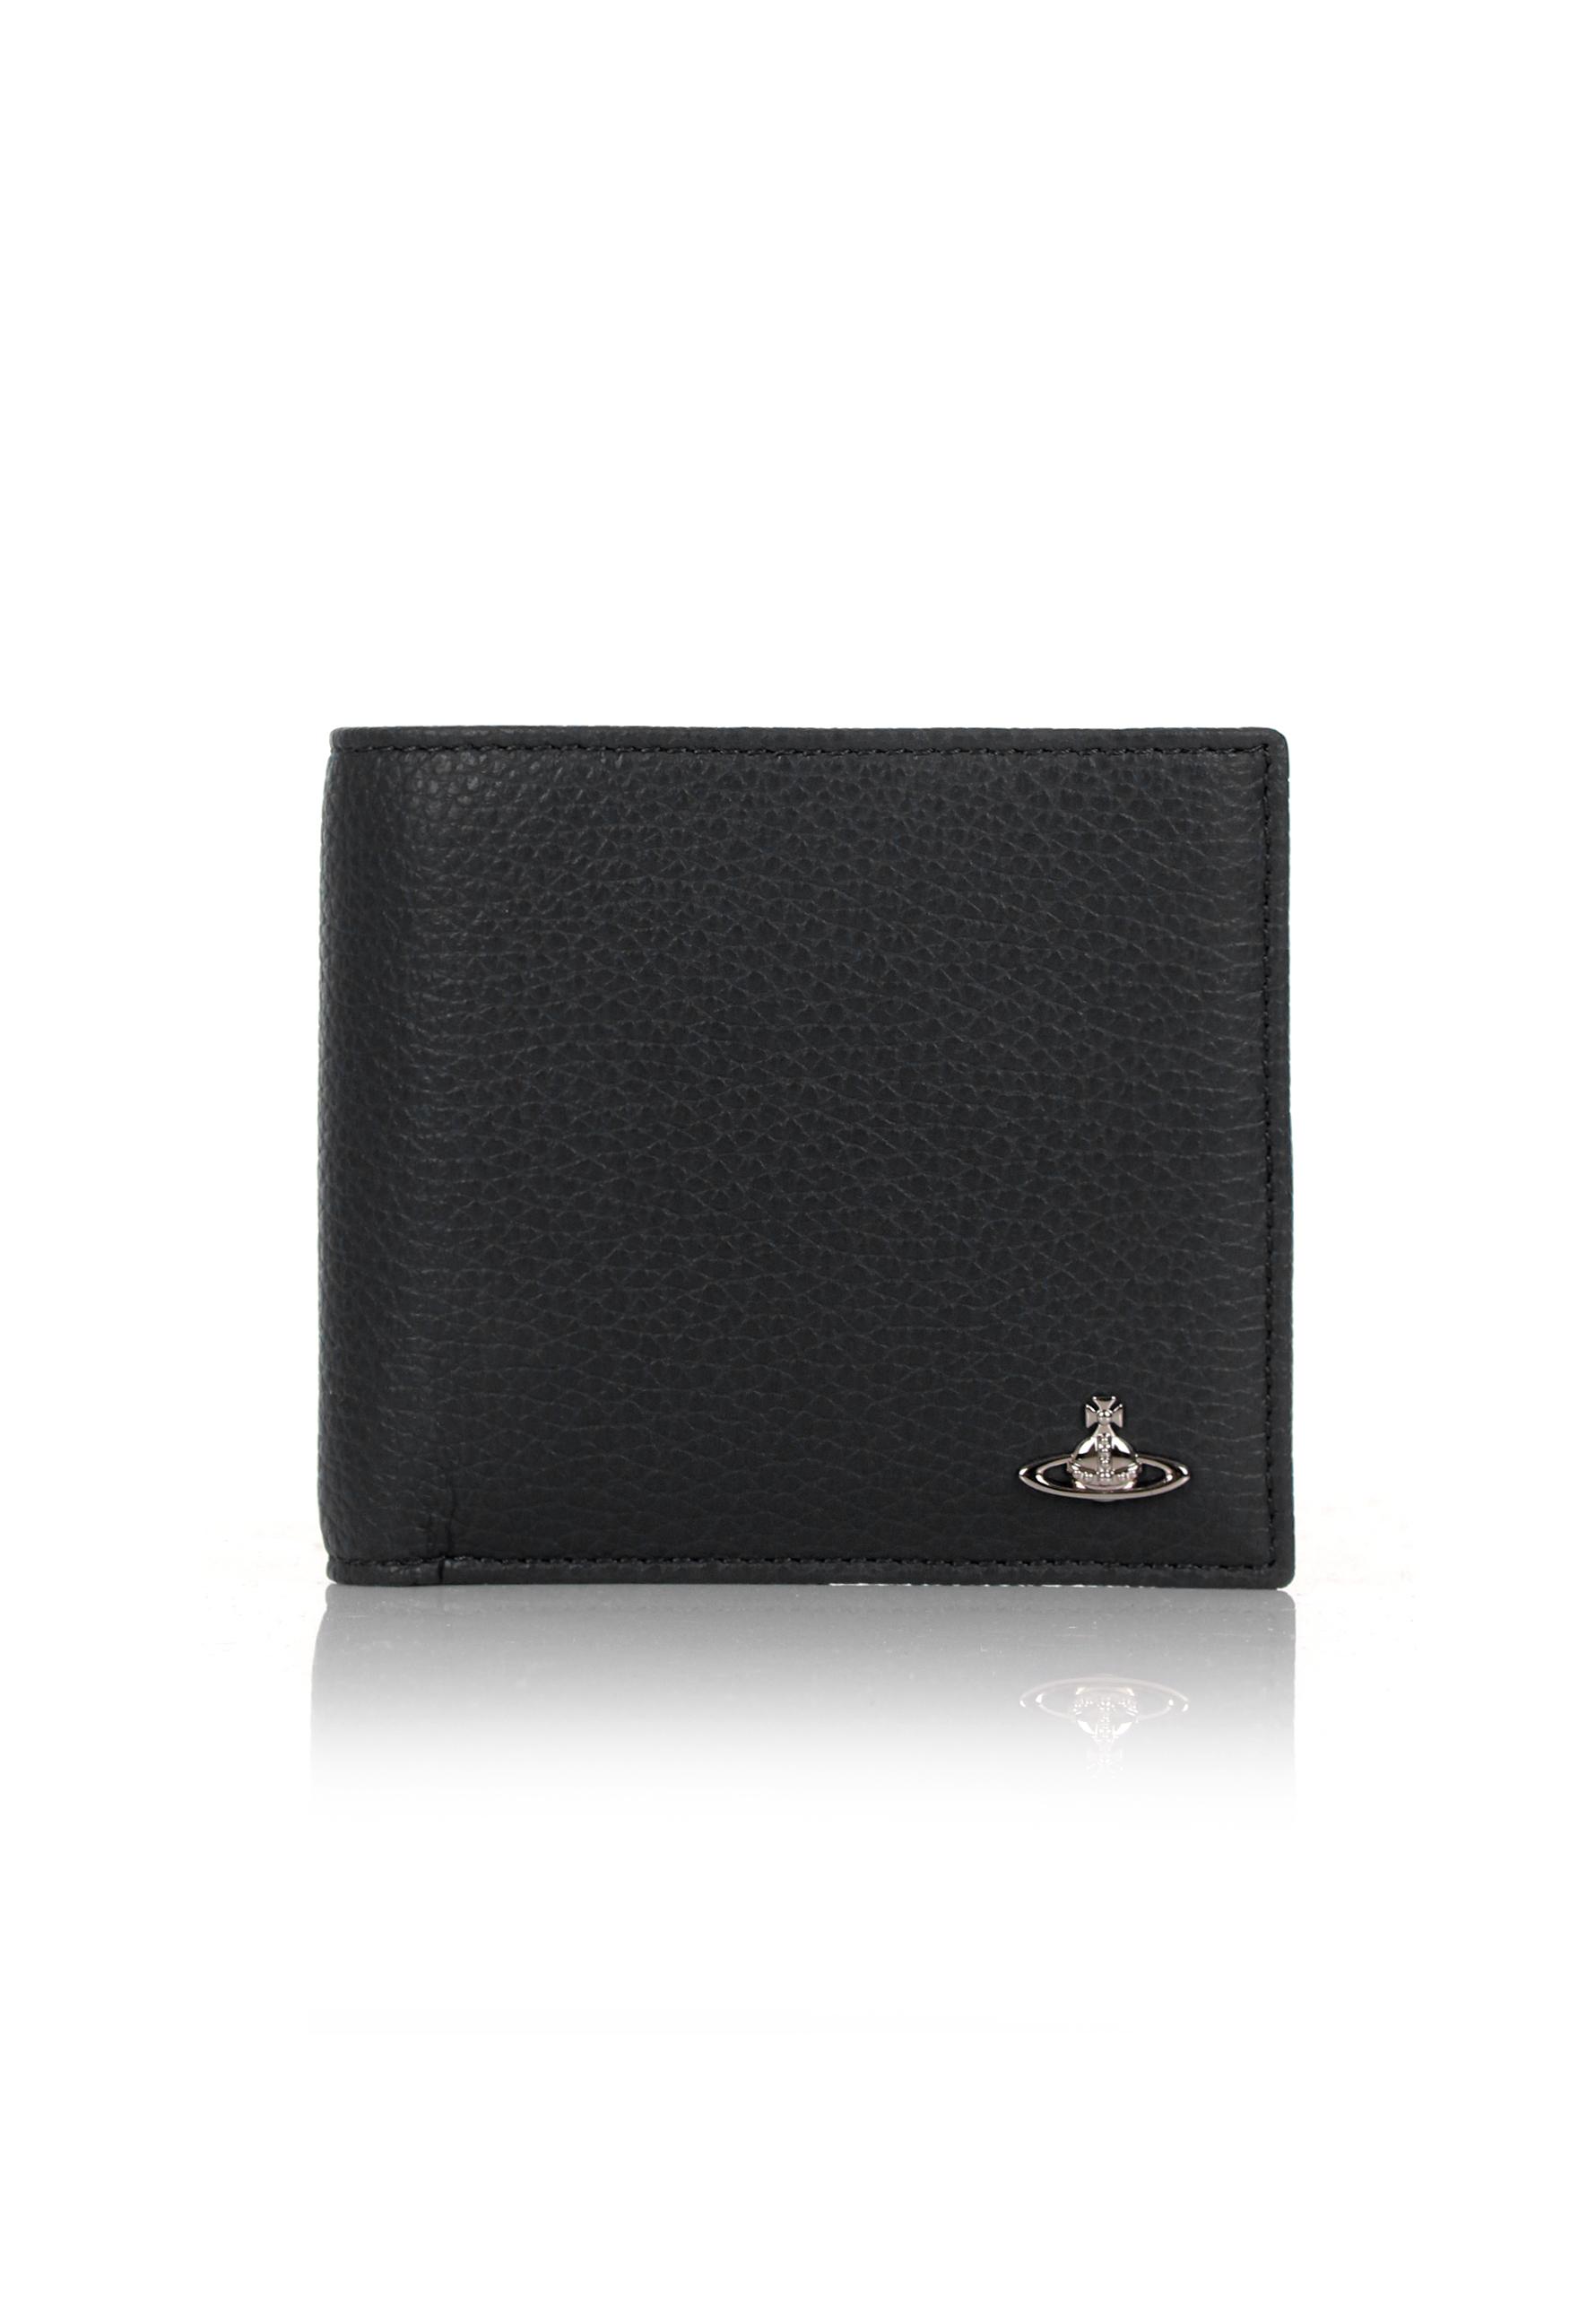 Lyst - Vivienne Westwood Milano Leather 33355 Billfold Wallet With Coin Holder Black in Black ...